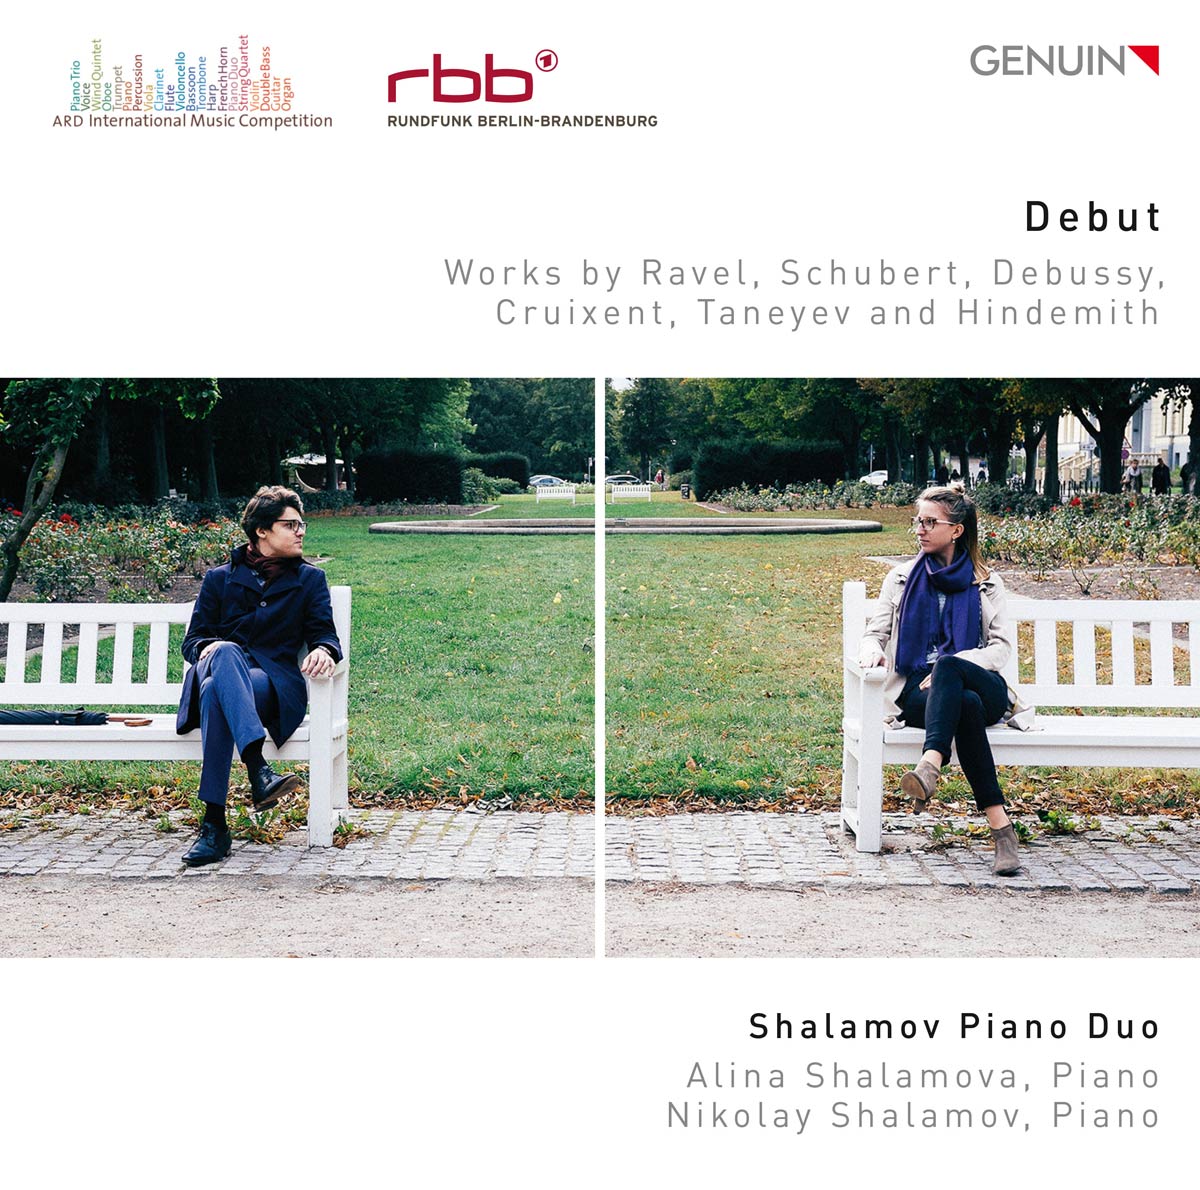 CD album cover 'Debut' (GEN 17461) with Shalamov Piano Duo